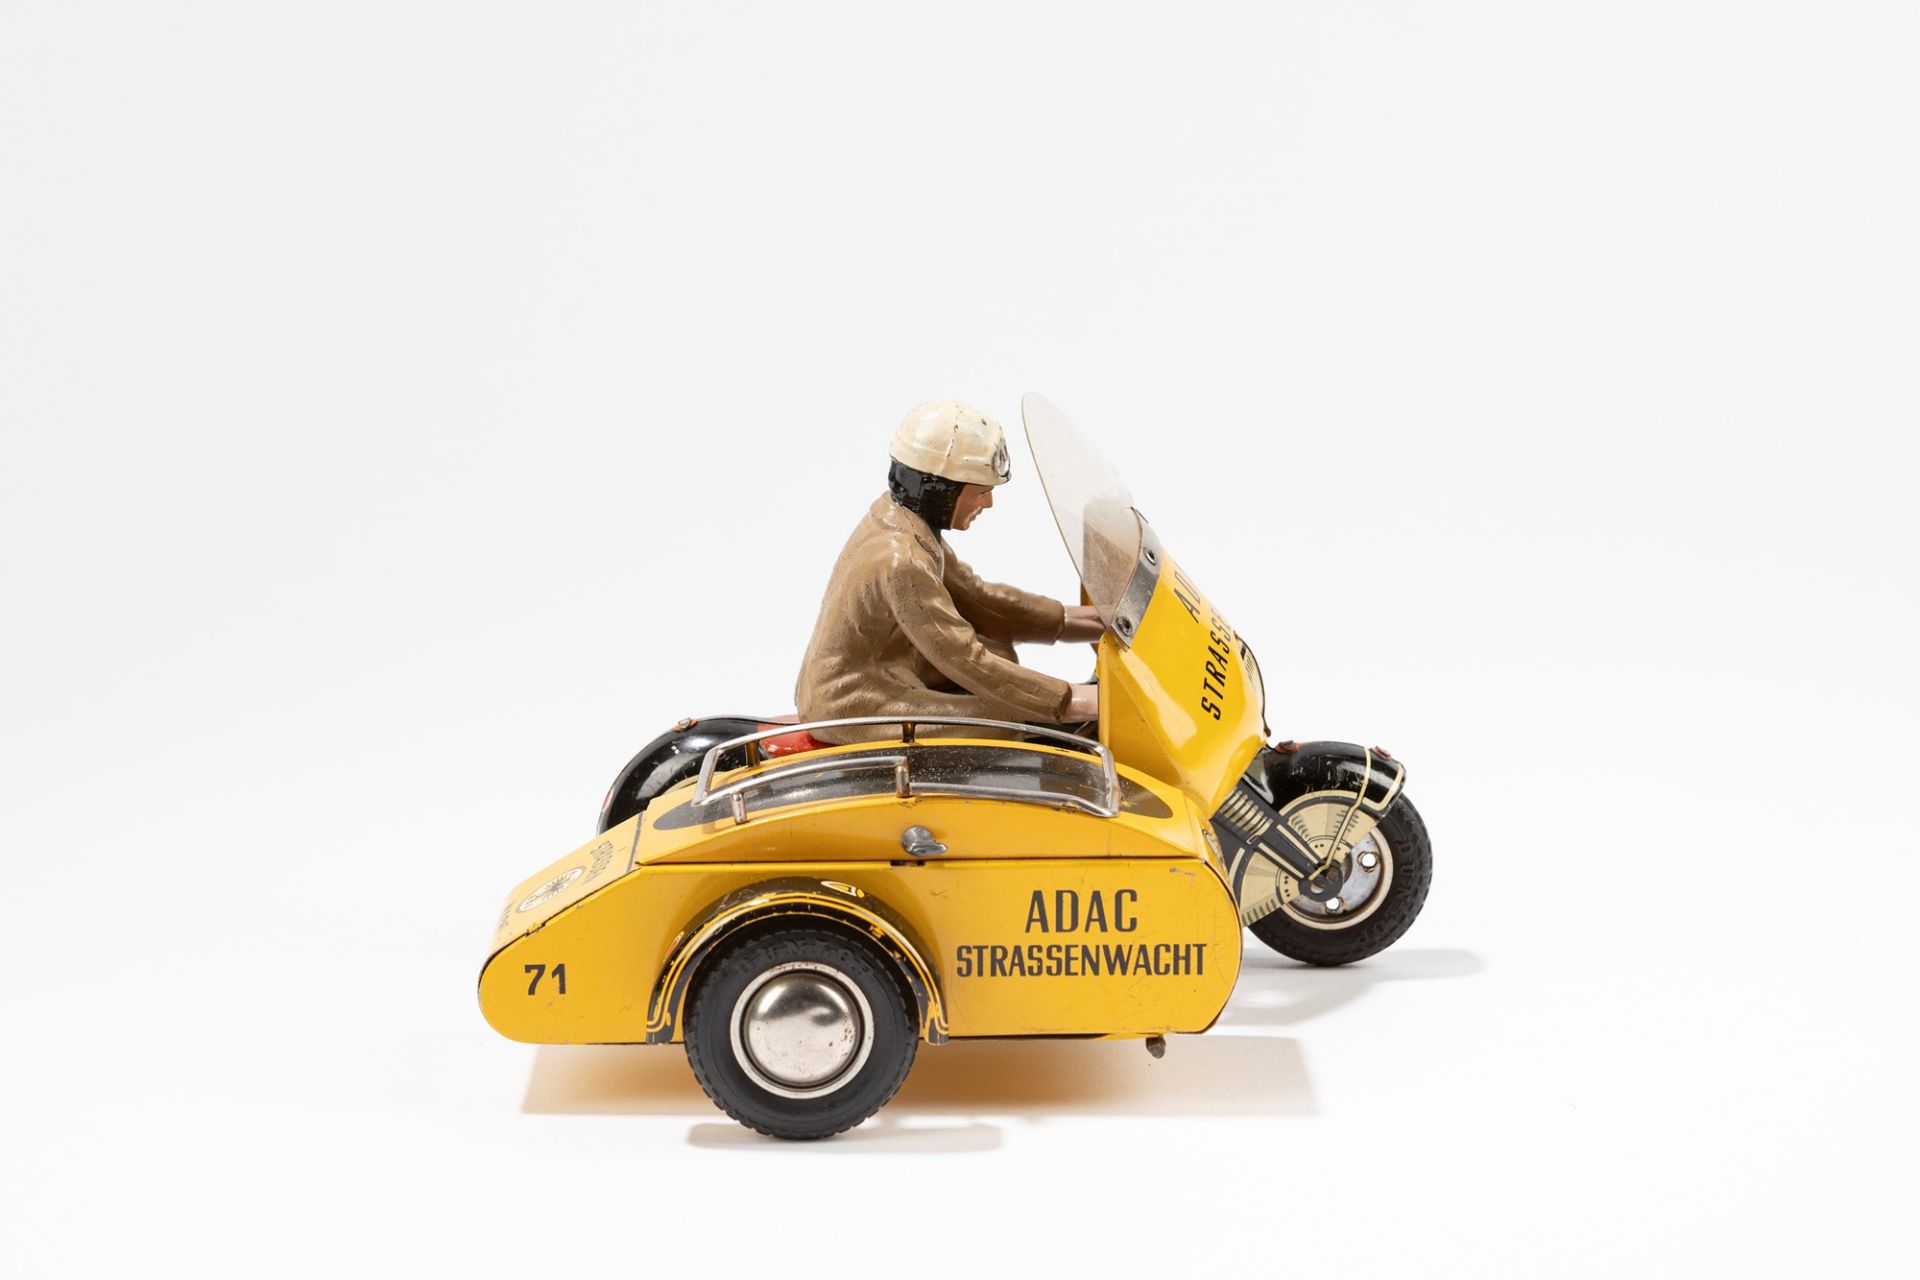 Gozo ADAC motorcycle with sidecar, 1950-1955 - Image 2 of 2